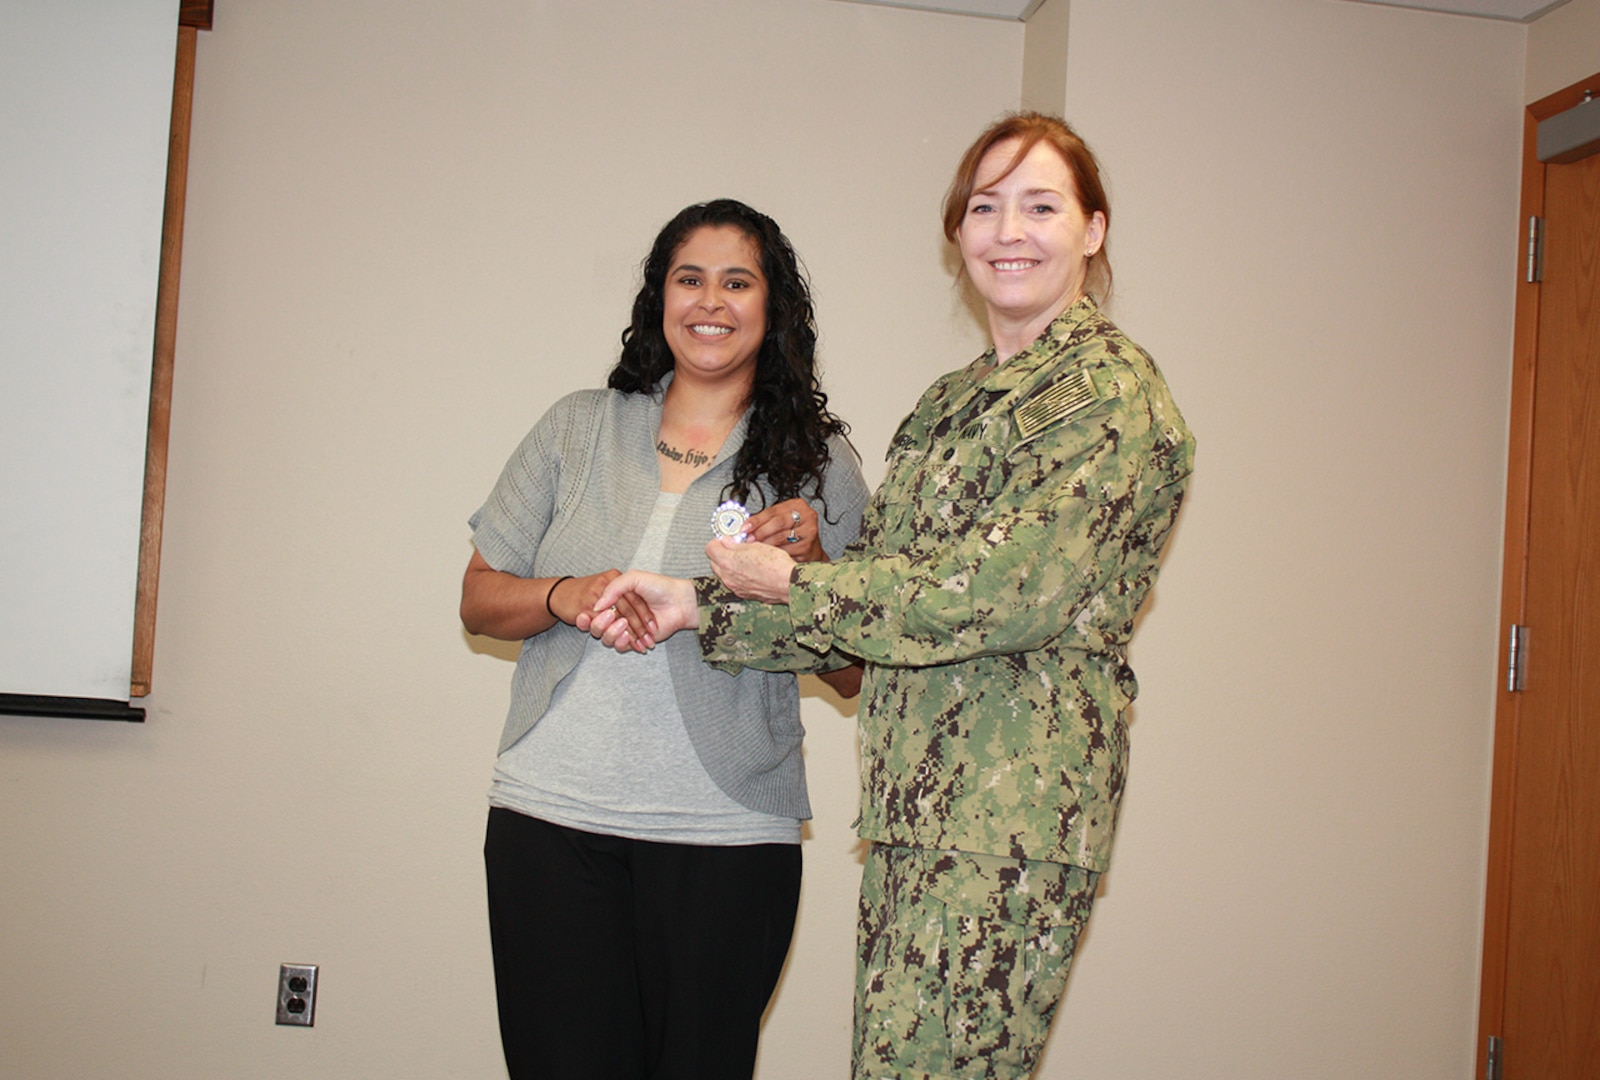 Defense Logistics Agency Land and Maritime Commander Navy Rear Adm. Michelle Skubic presents her commander’s coin for excellence to Gisselle Lopez during a July 10 site visit and review at DLA Maritime at Puget Sound Naval Shipyard in Bremerton, Wash. Lopez is a supply technician at DLA Maritime at Puget Sound.